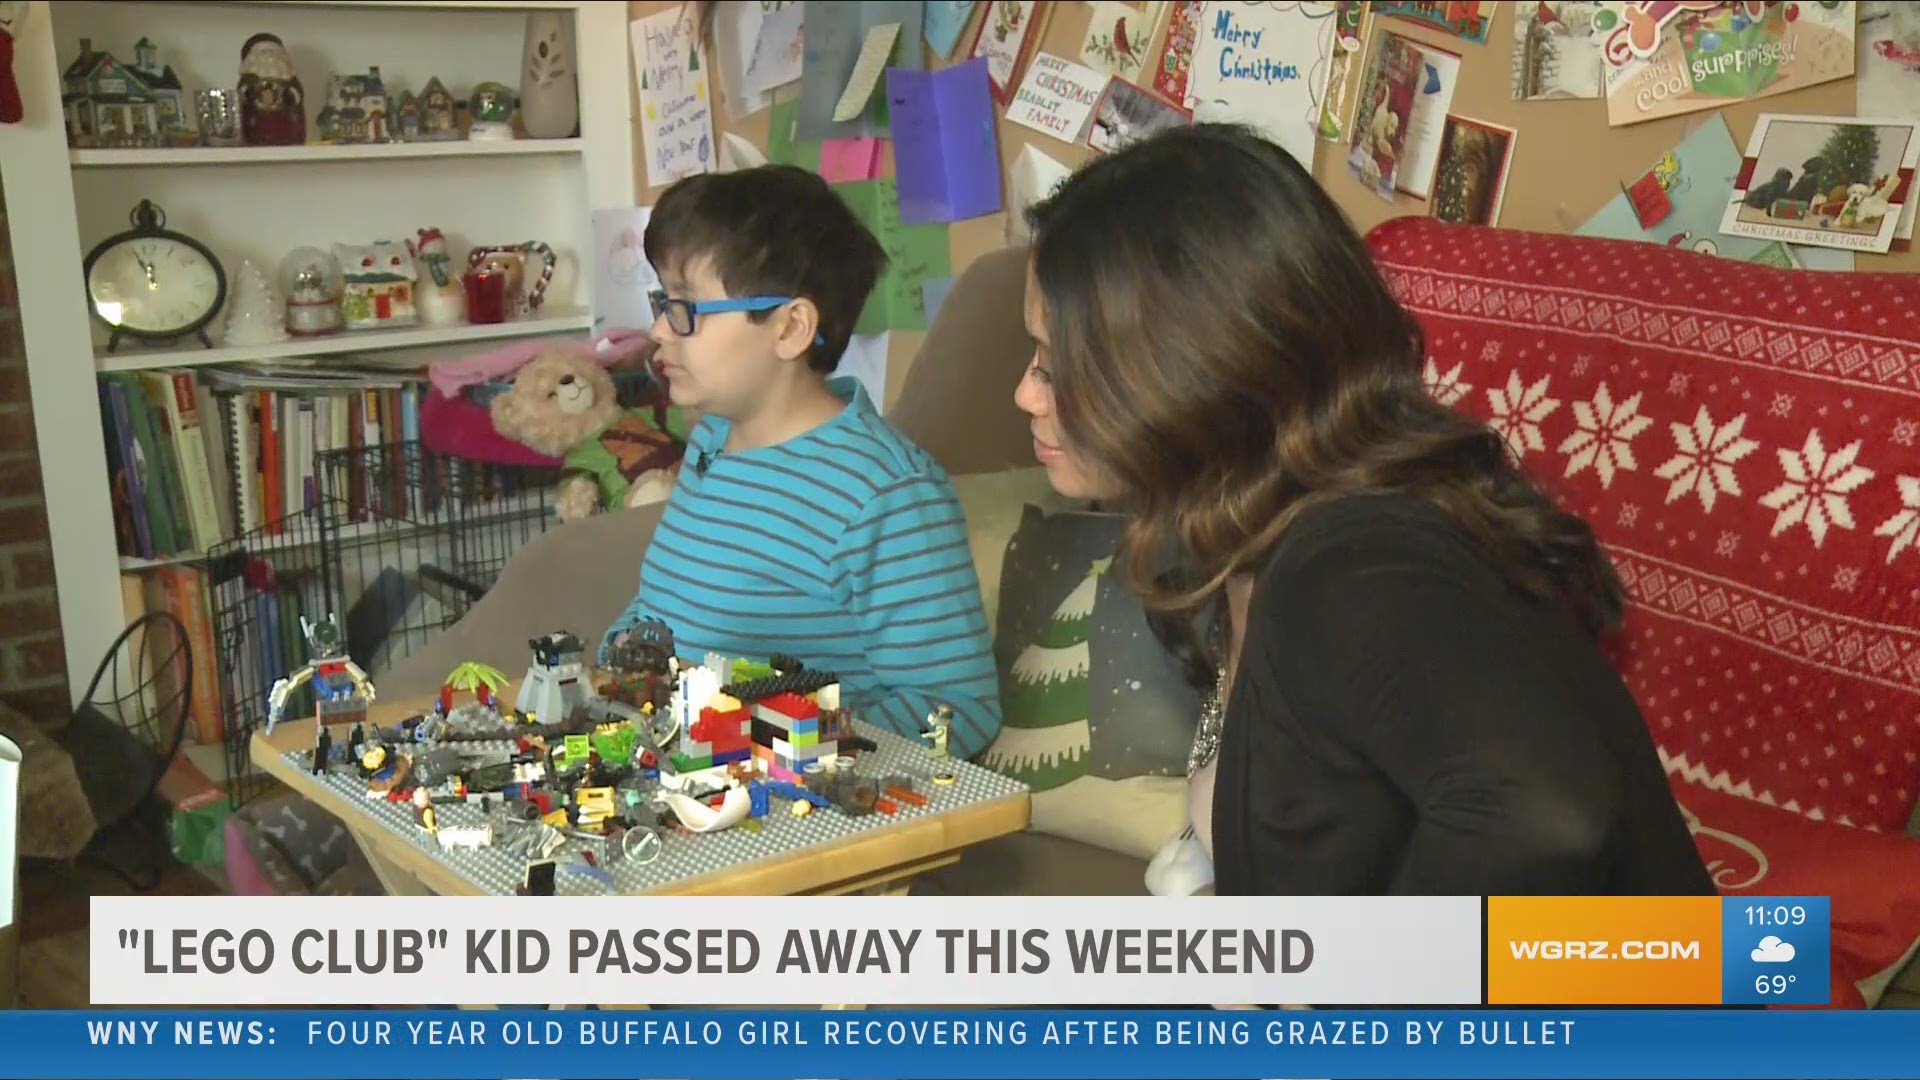 The young boy who spread joy to other kids at Oishei Children's Hospital with "Sebastian's Lego Club" passed away this weekend.